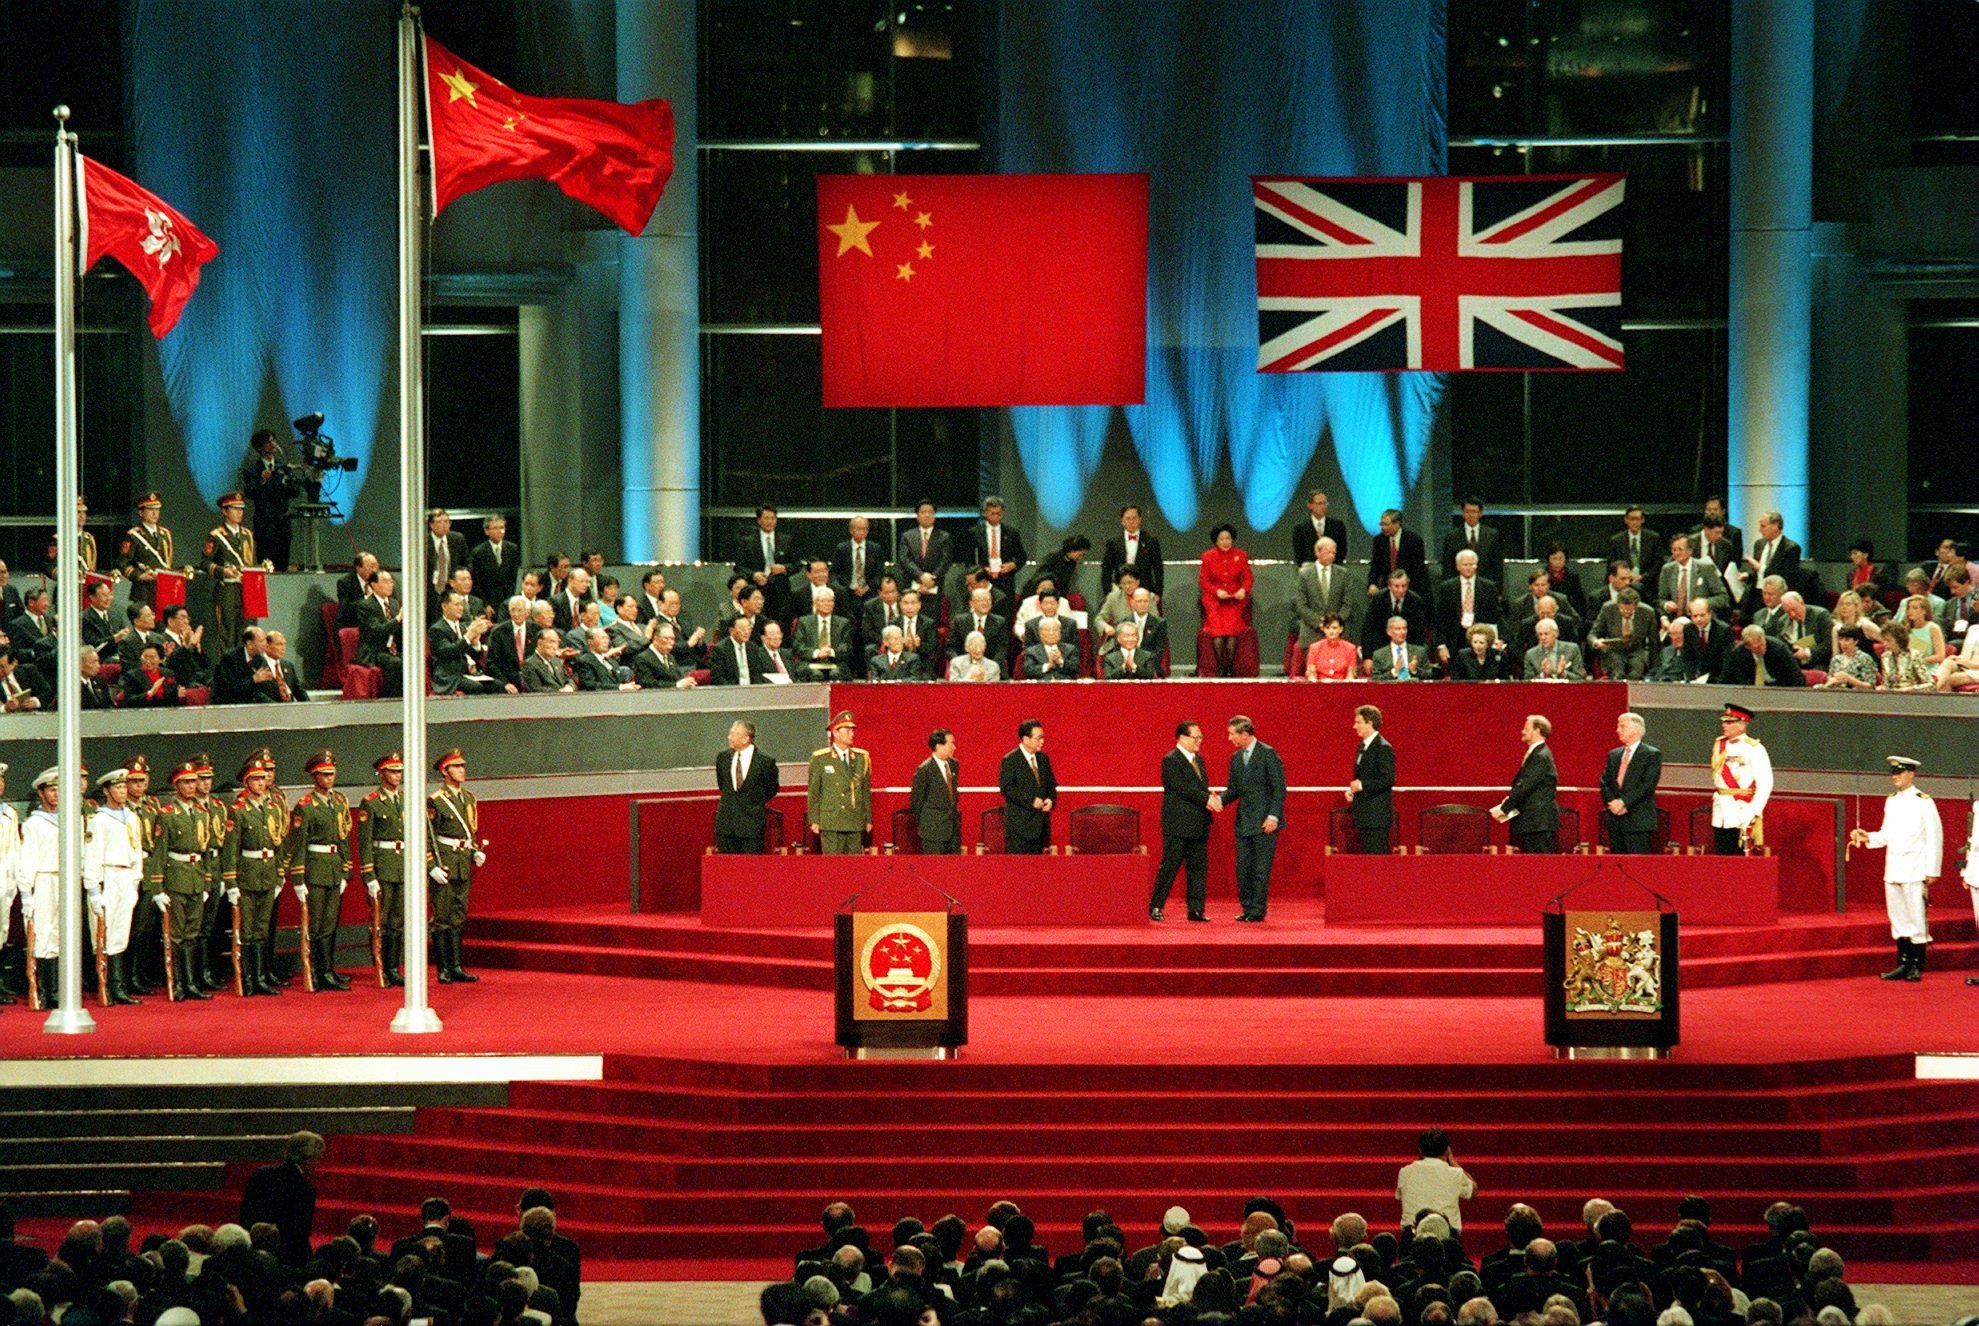 Jiang Zemin shakes hands with Charles, Prince of Wales at the handover ceremony for Hong Kong at midnight on June 30, 1997. Photo: Handout